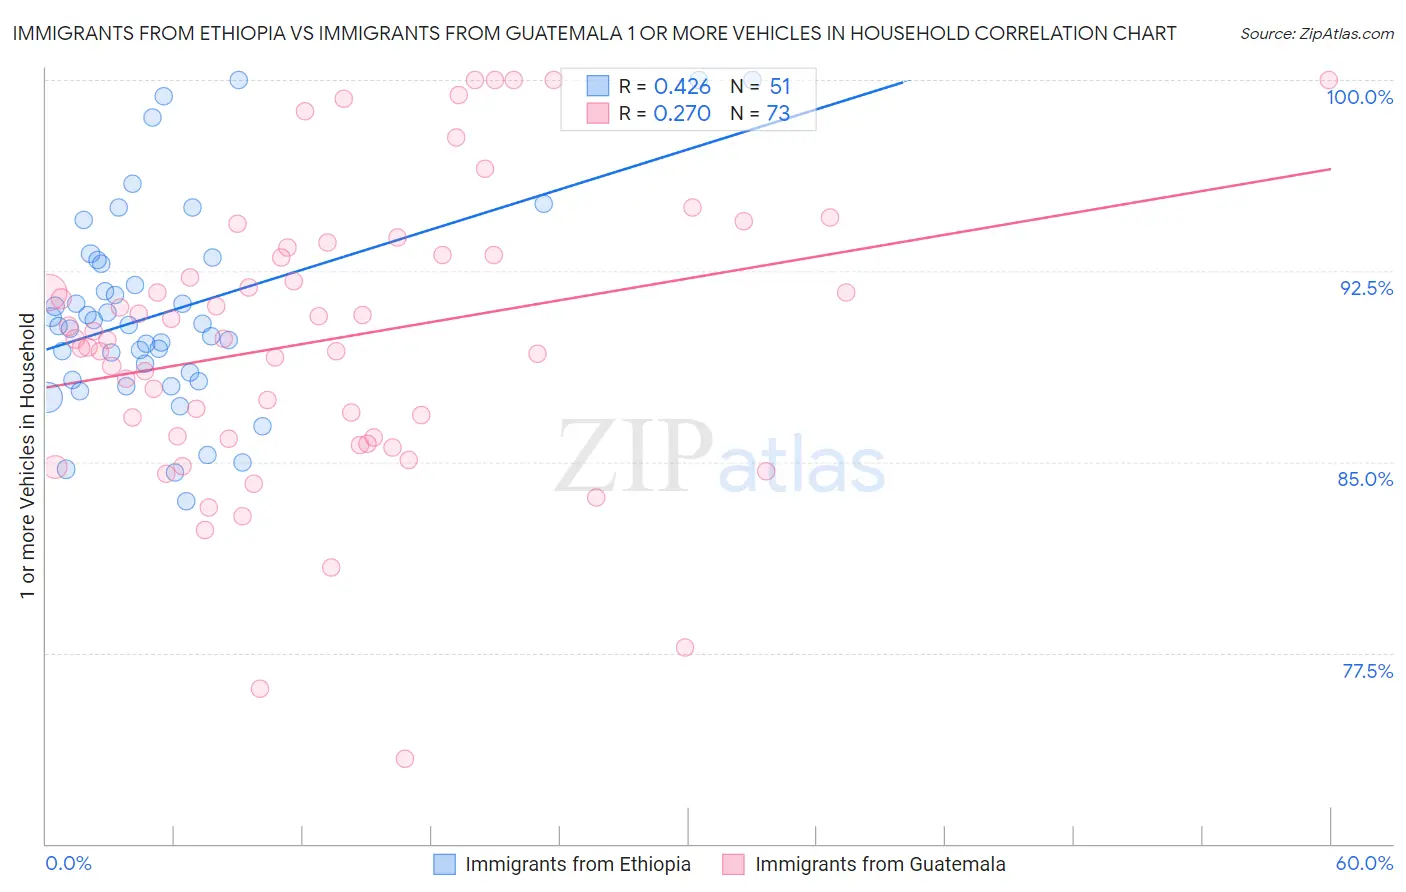 Immigrants from Ethiopia vs Immigrants from Guatemala 1 or more Vehicles in Household